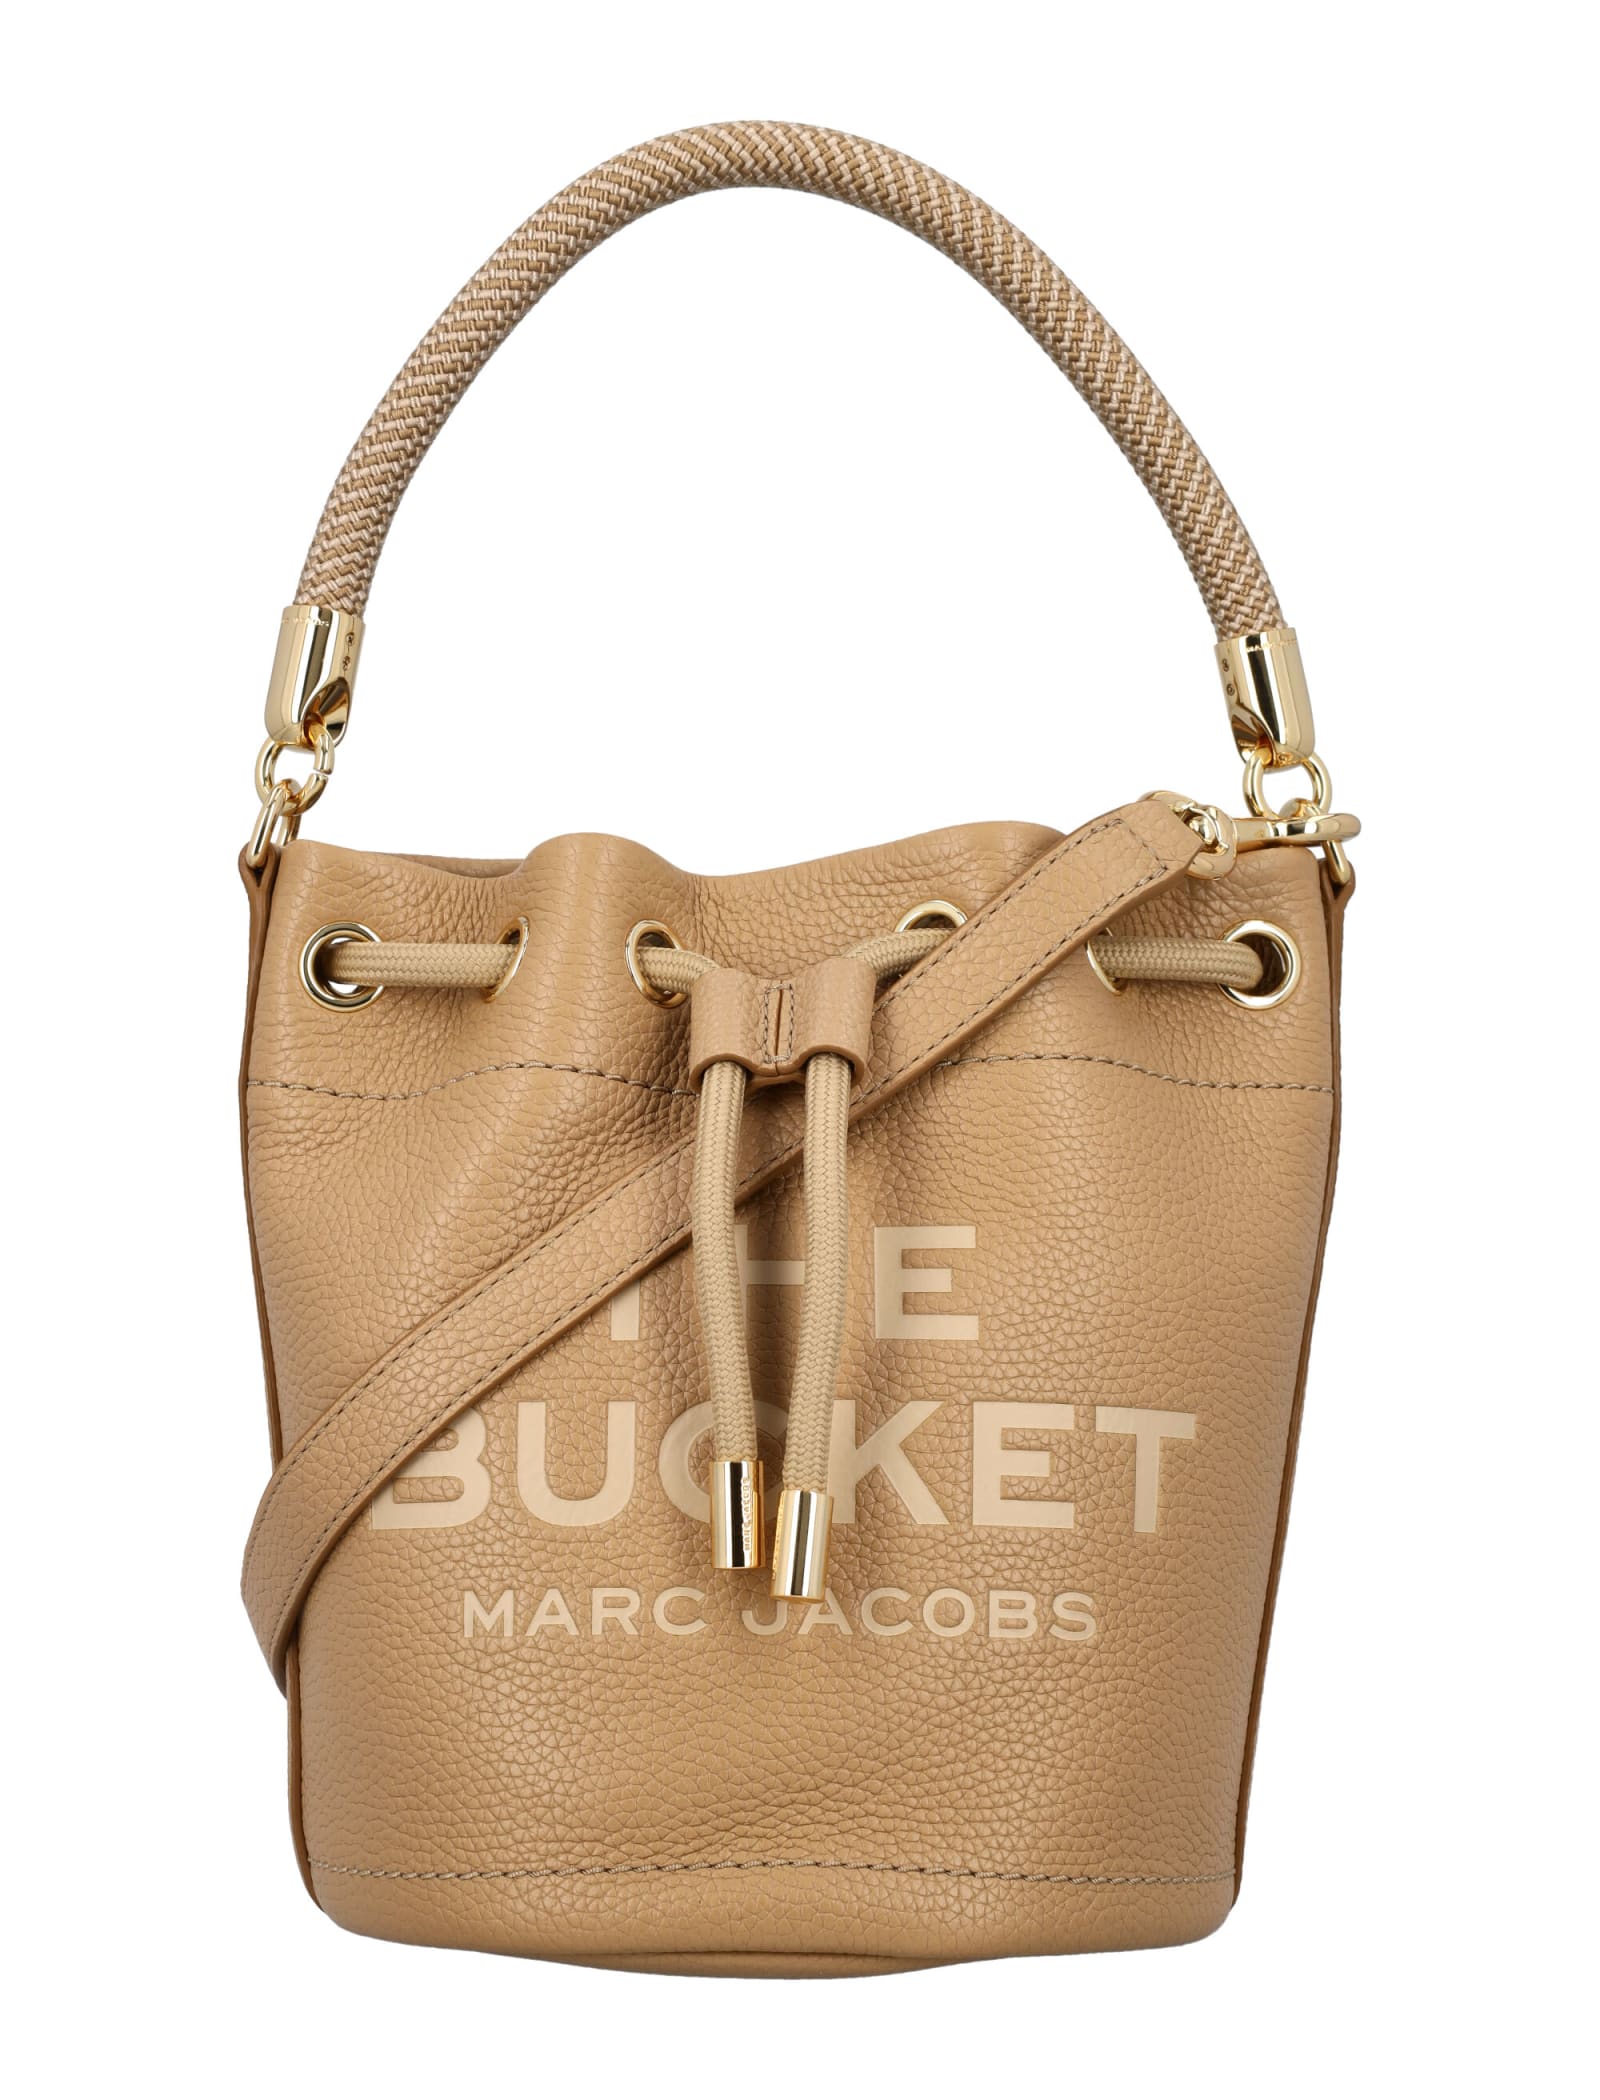 Marc Jacobs The Bucket Bag In Camel